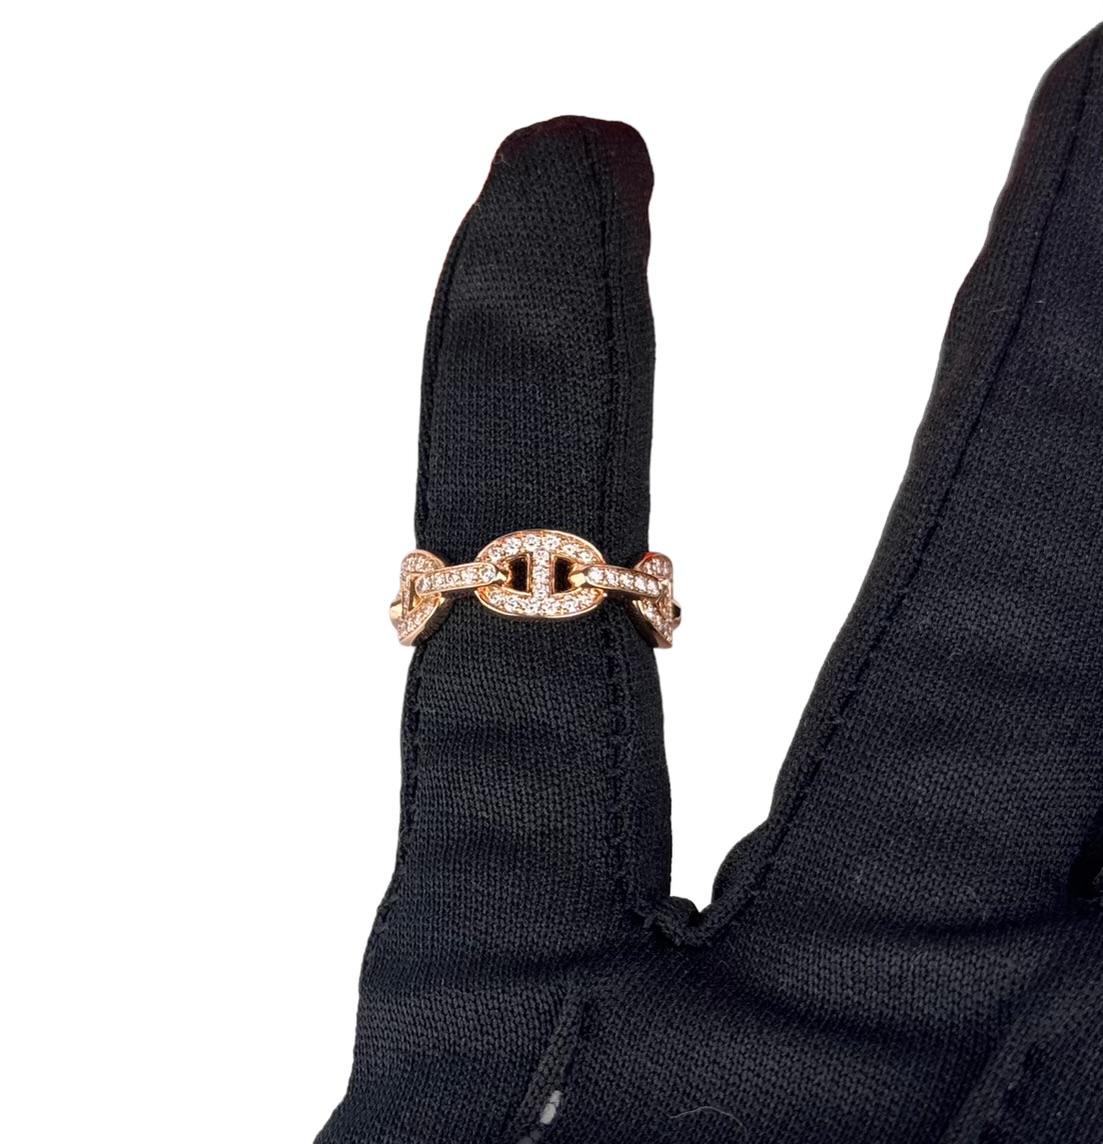 Hermes Chaine D'ancre rose gold ring size 54 sold out retail for over $13,000